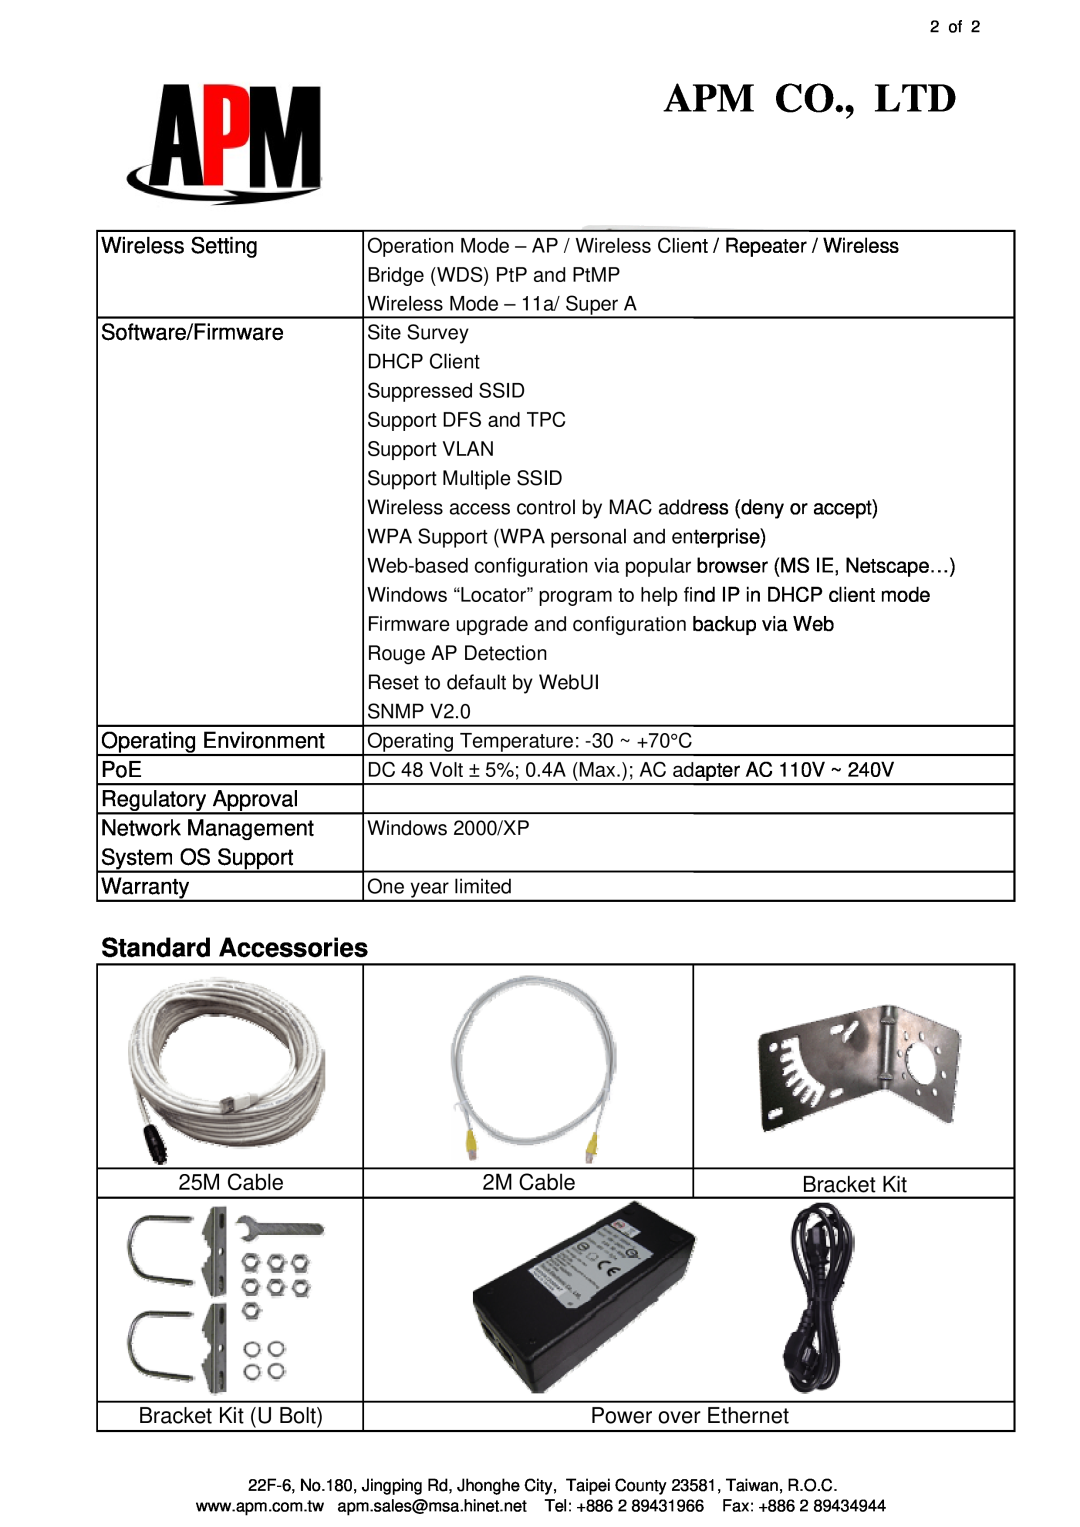 APM APE-502401a-1 specifications Standard Accessories 